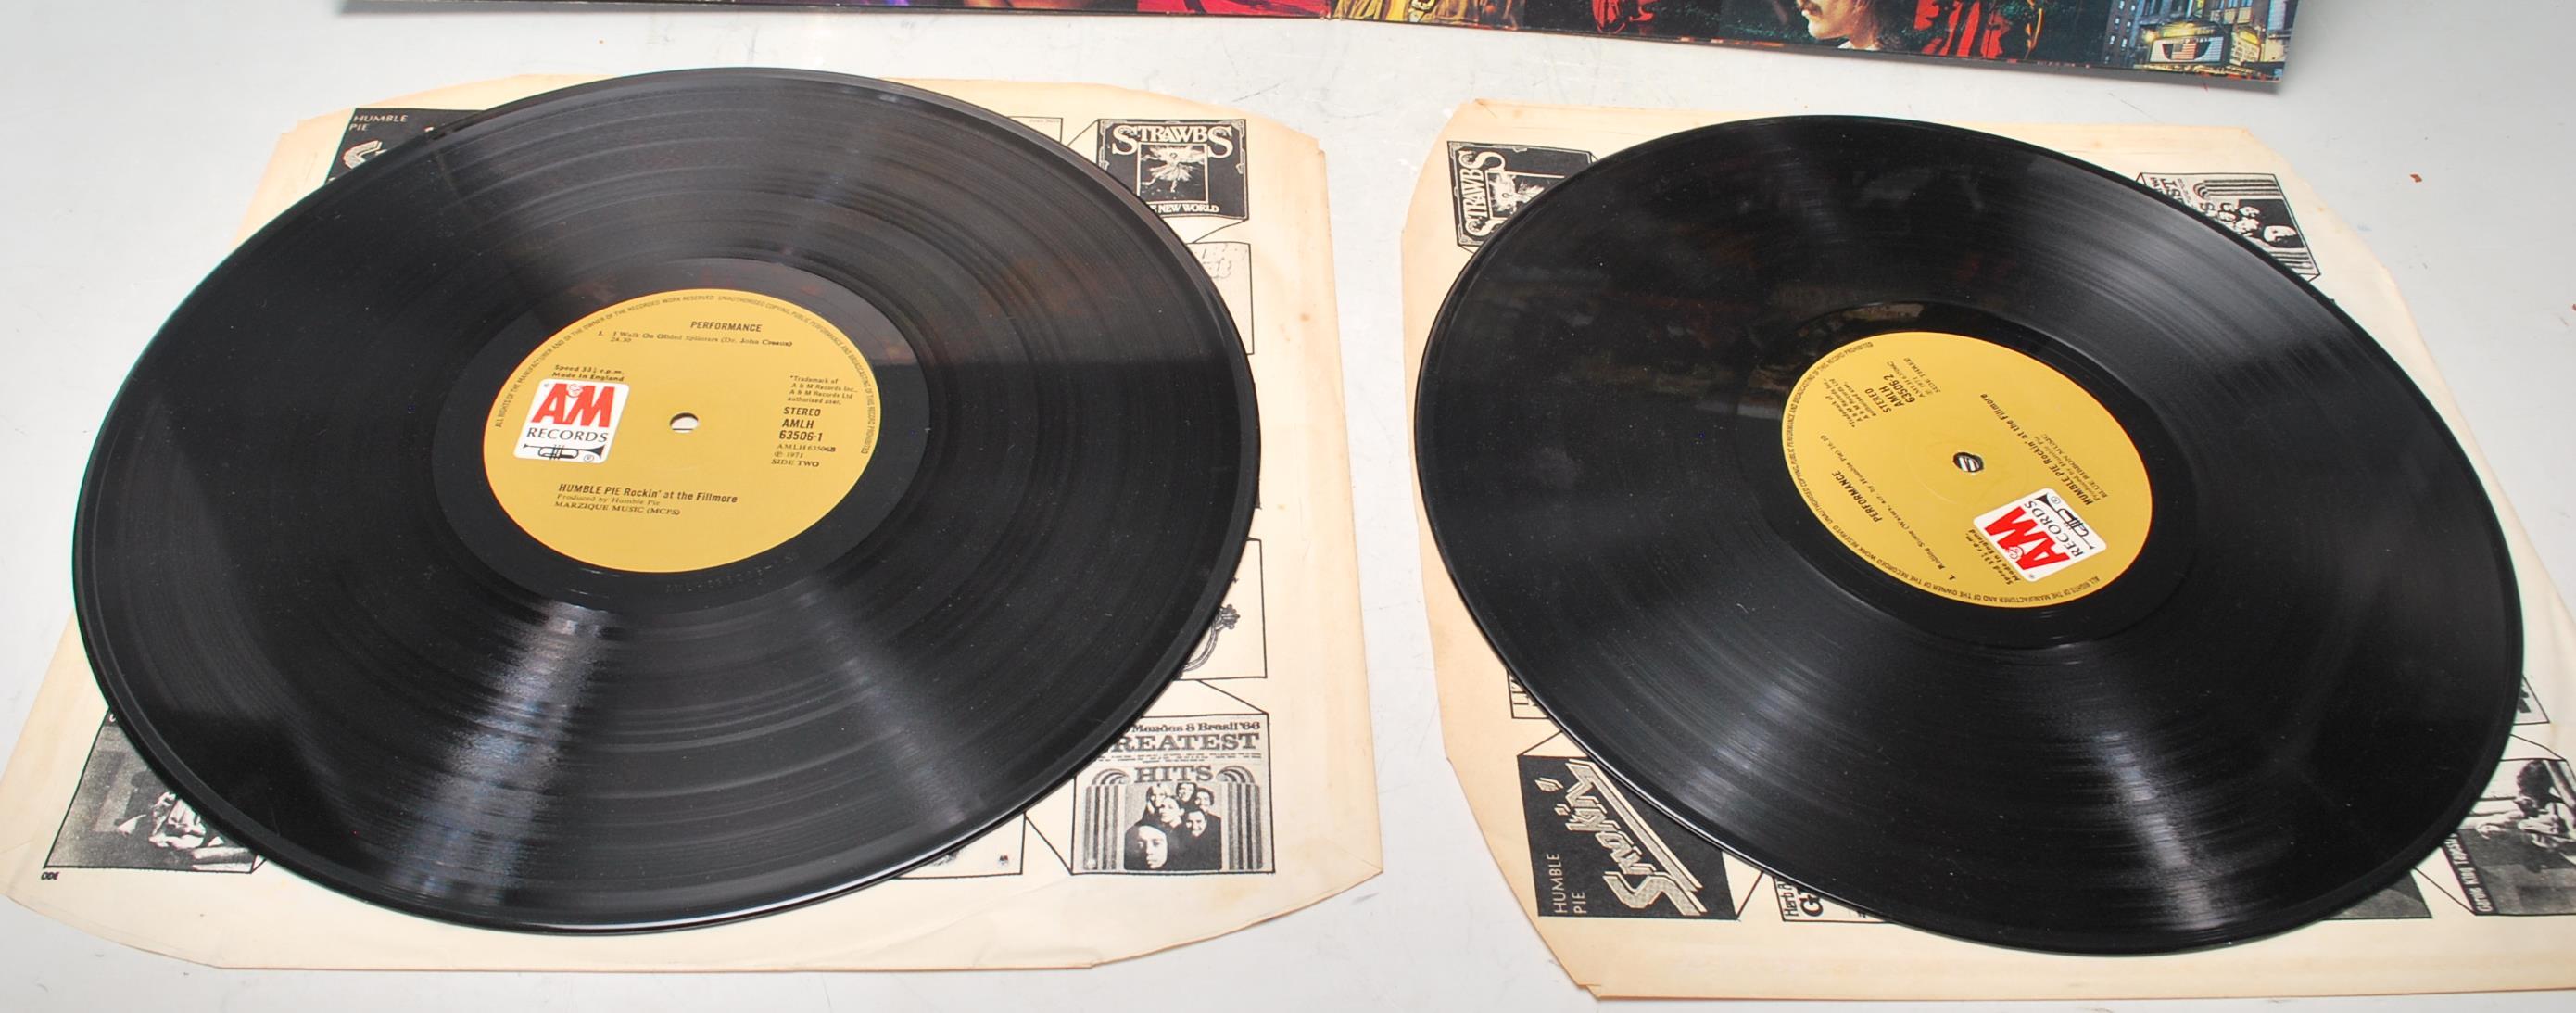 HUMBLE PIE - TWO VINYL RECORD LPS - EAT IT & ROCKIN' THE FILLMORE - Image 9 of 9